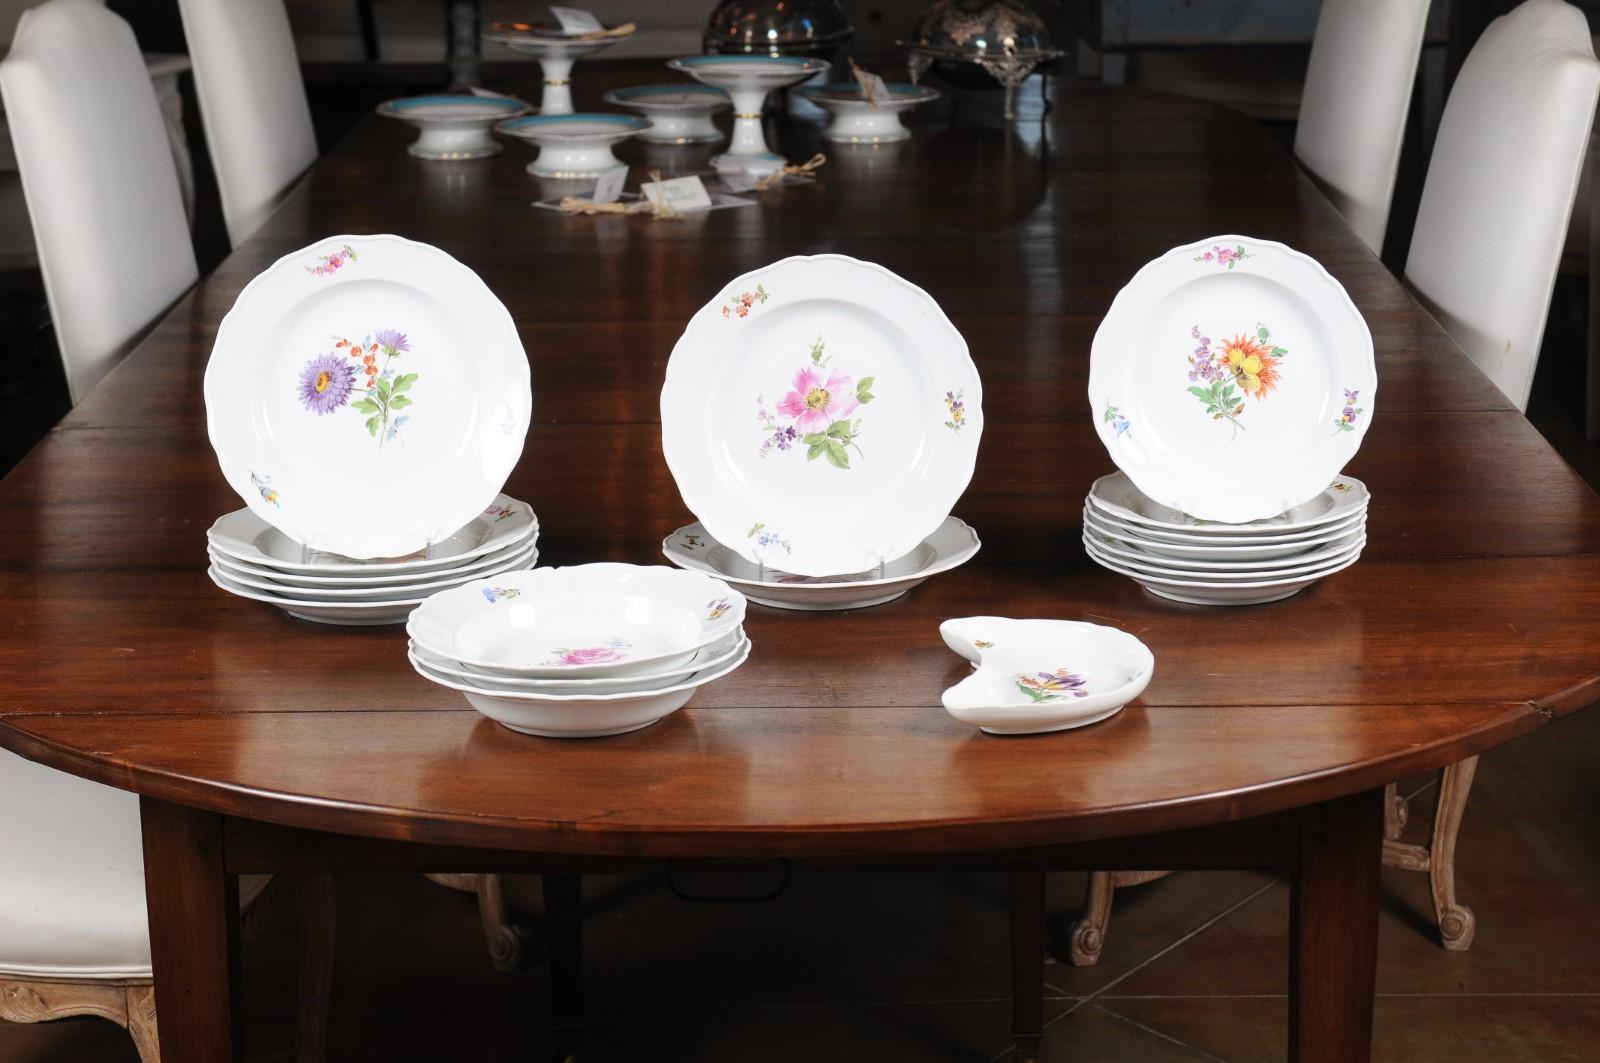 A 24-piece set of German Meissen porcelain service from the 19th century, with floral decor. Born in Eastern Germany during the 19th century, each of this 24 pieces service features a lovely floral décor made of purple, pink, orange or yellow